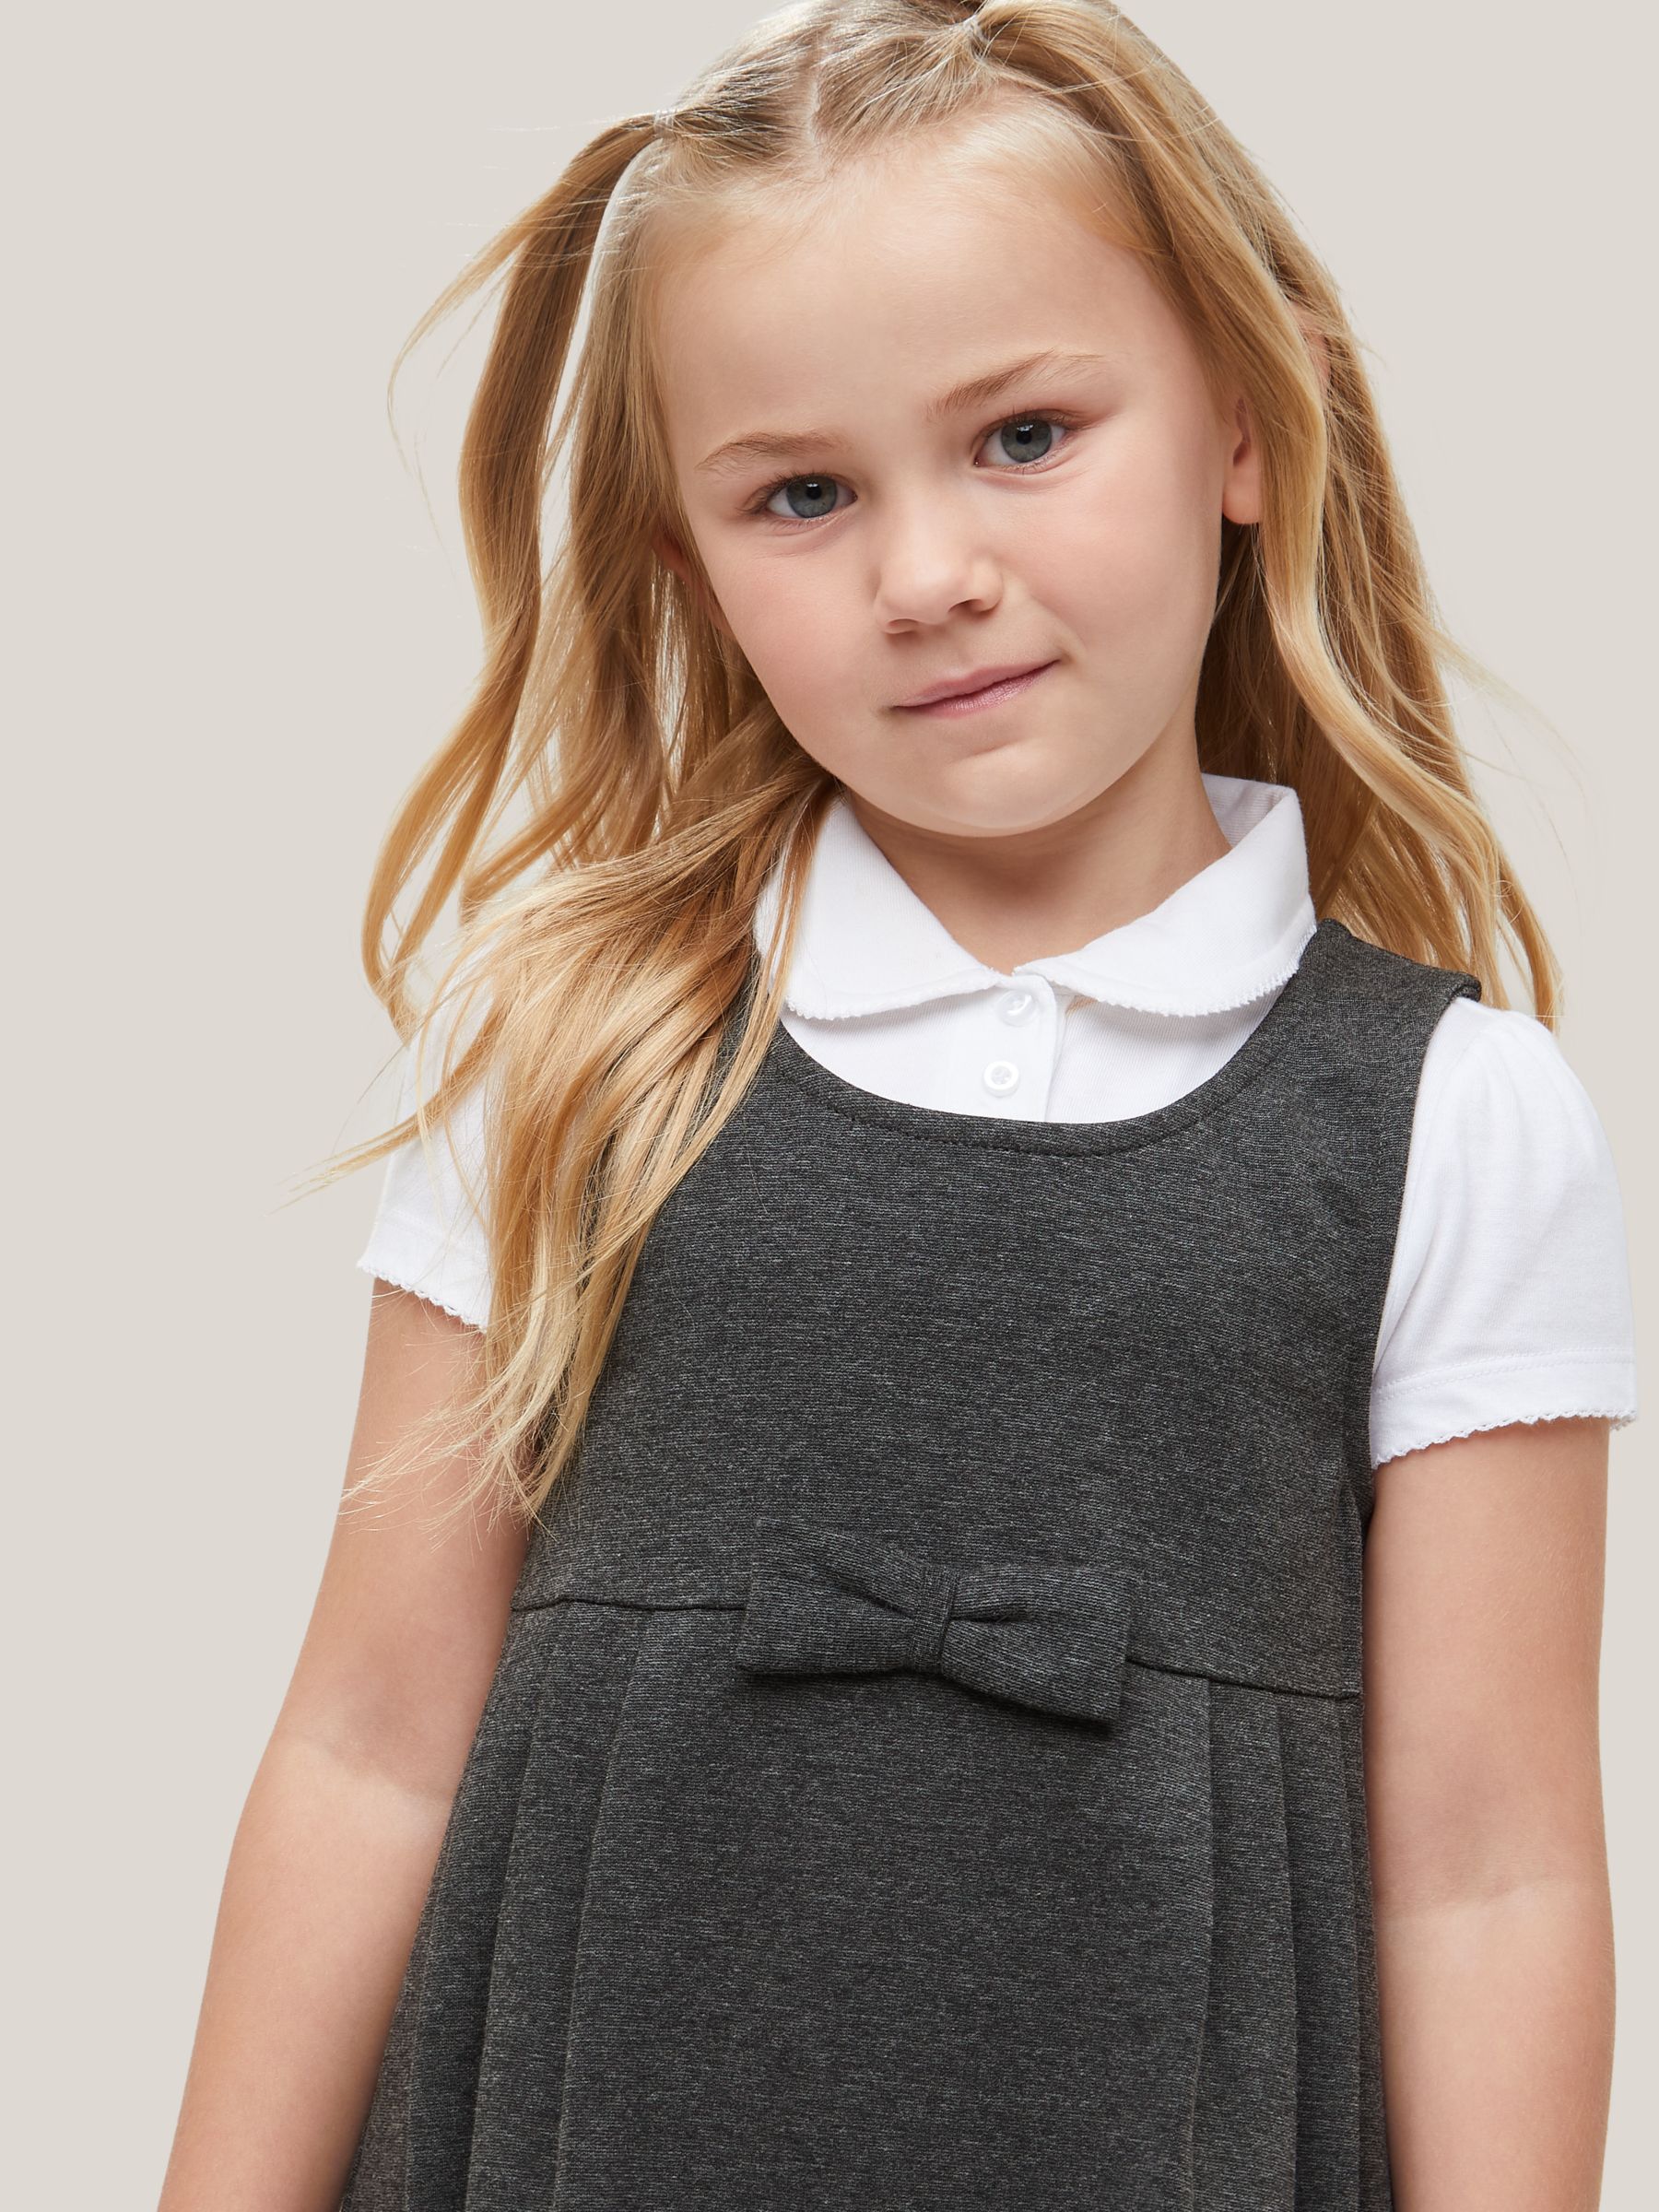 John Lewis Girls' Pleated School Tunic With Bow, Grey, 3 years